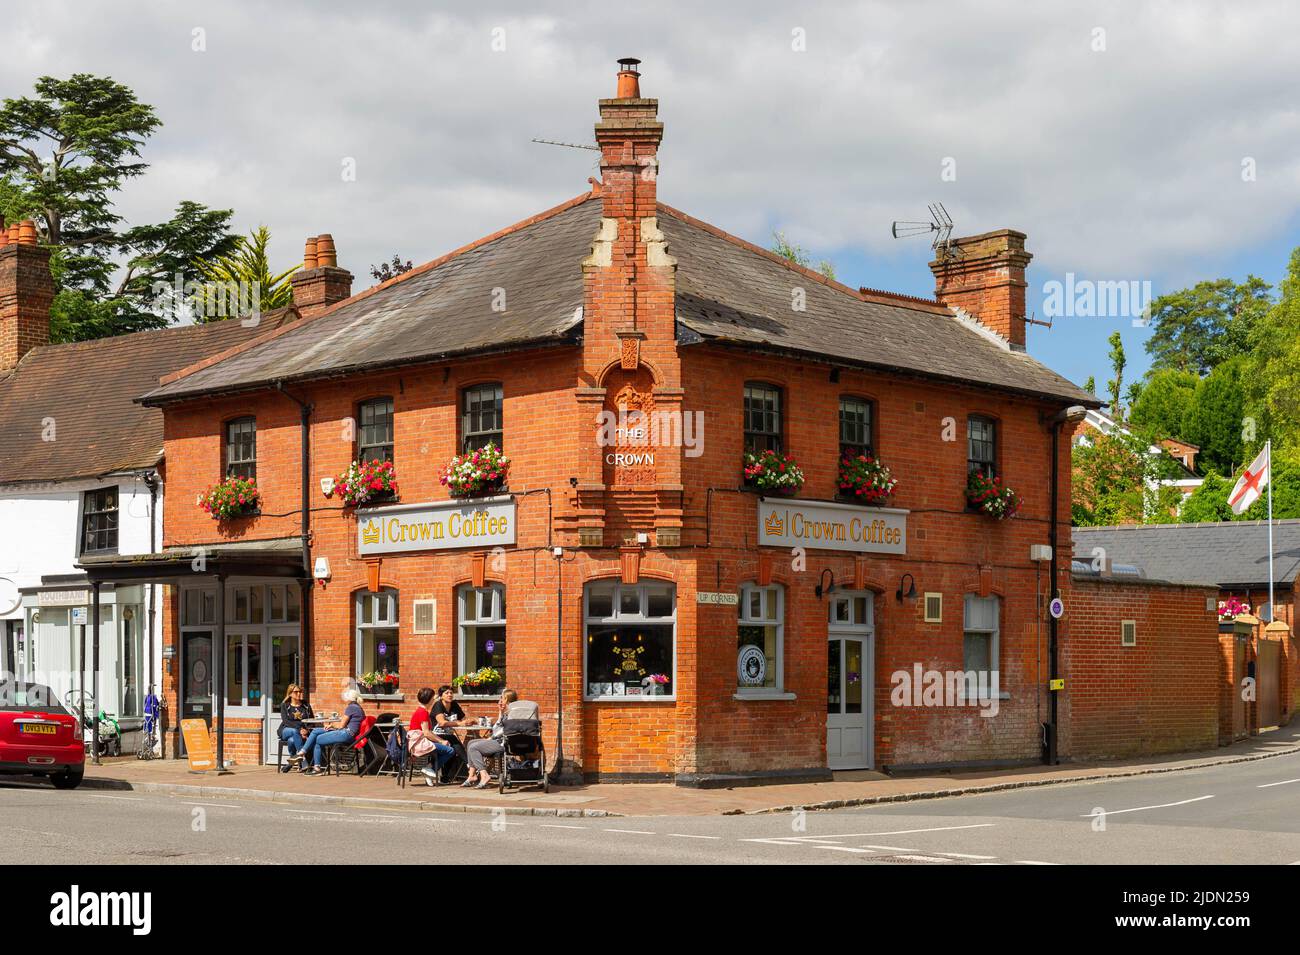 The former Crown Public House, now a coffee shop, Chalfont St Giles, Buckinghamshire, England Stock Photo